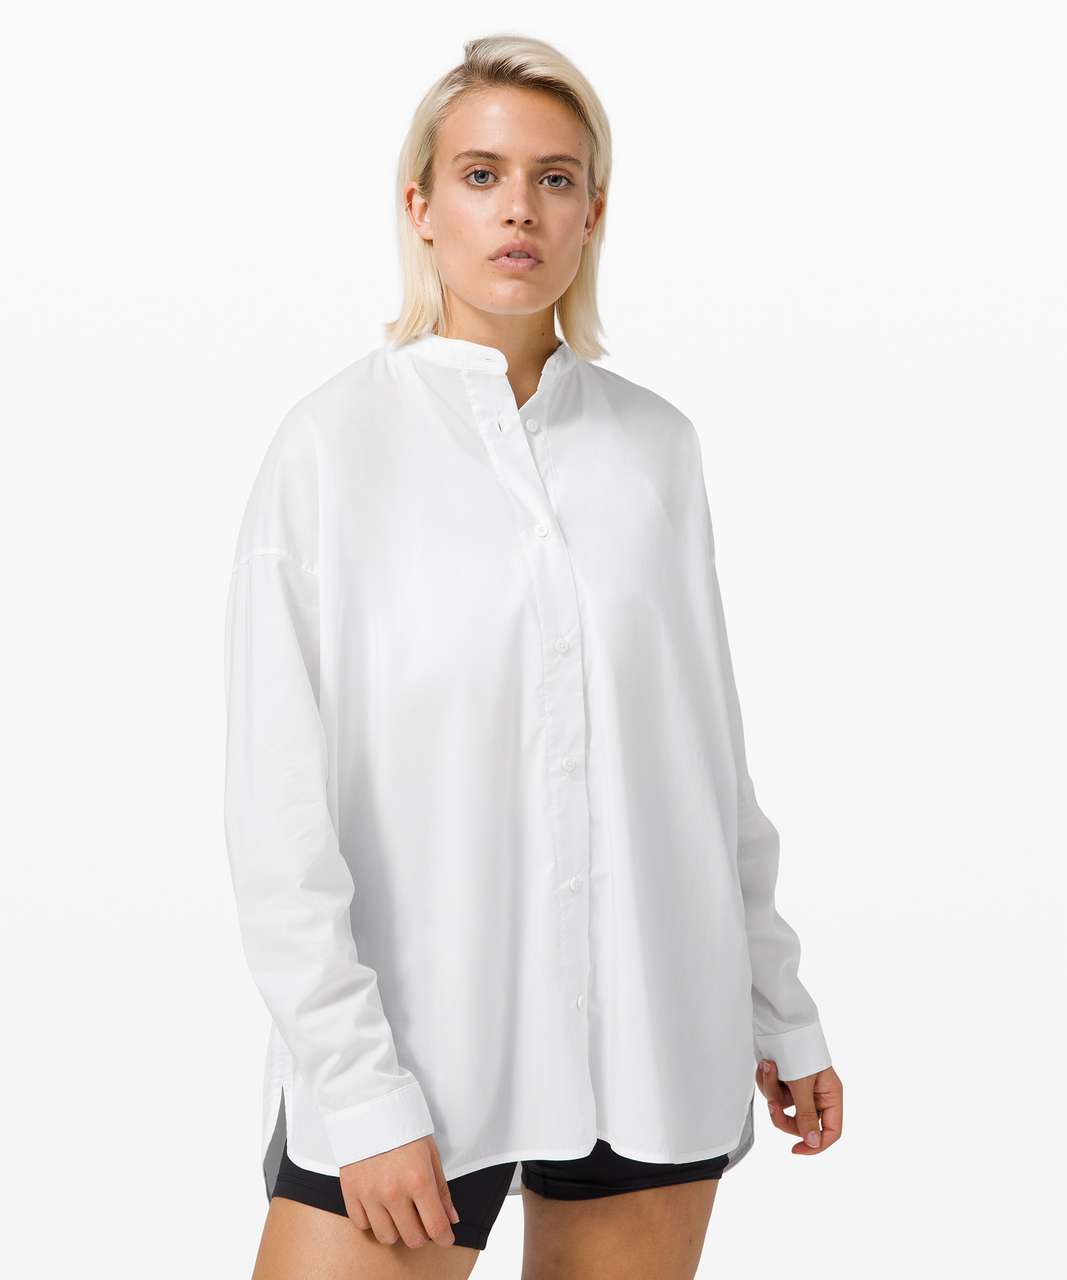 Lululemon All Days Shirt - White (First Release)